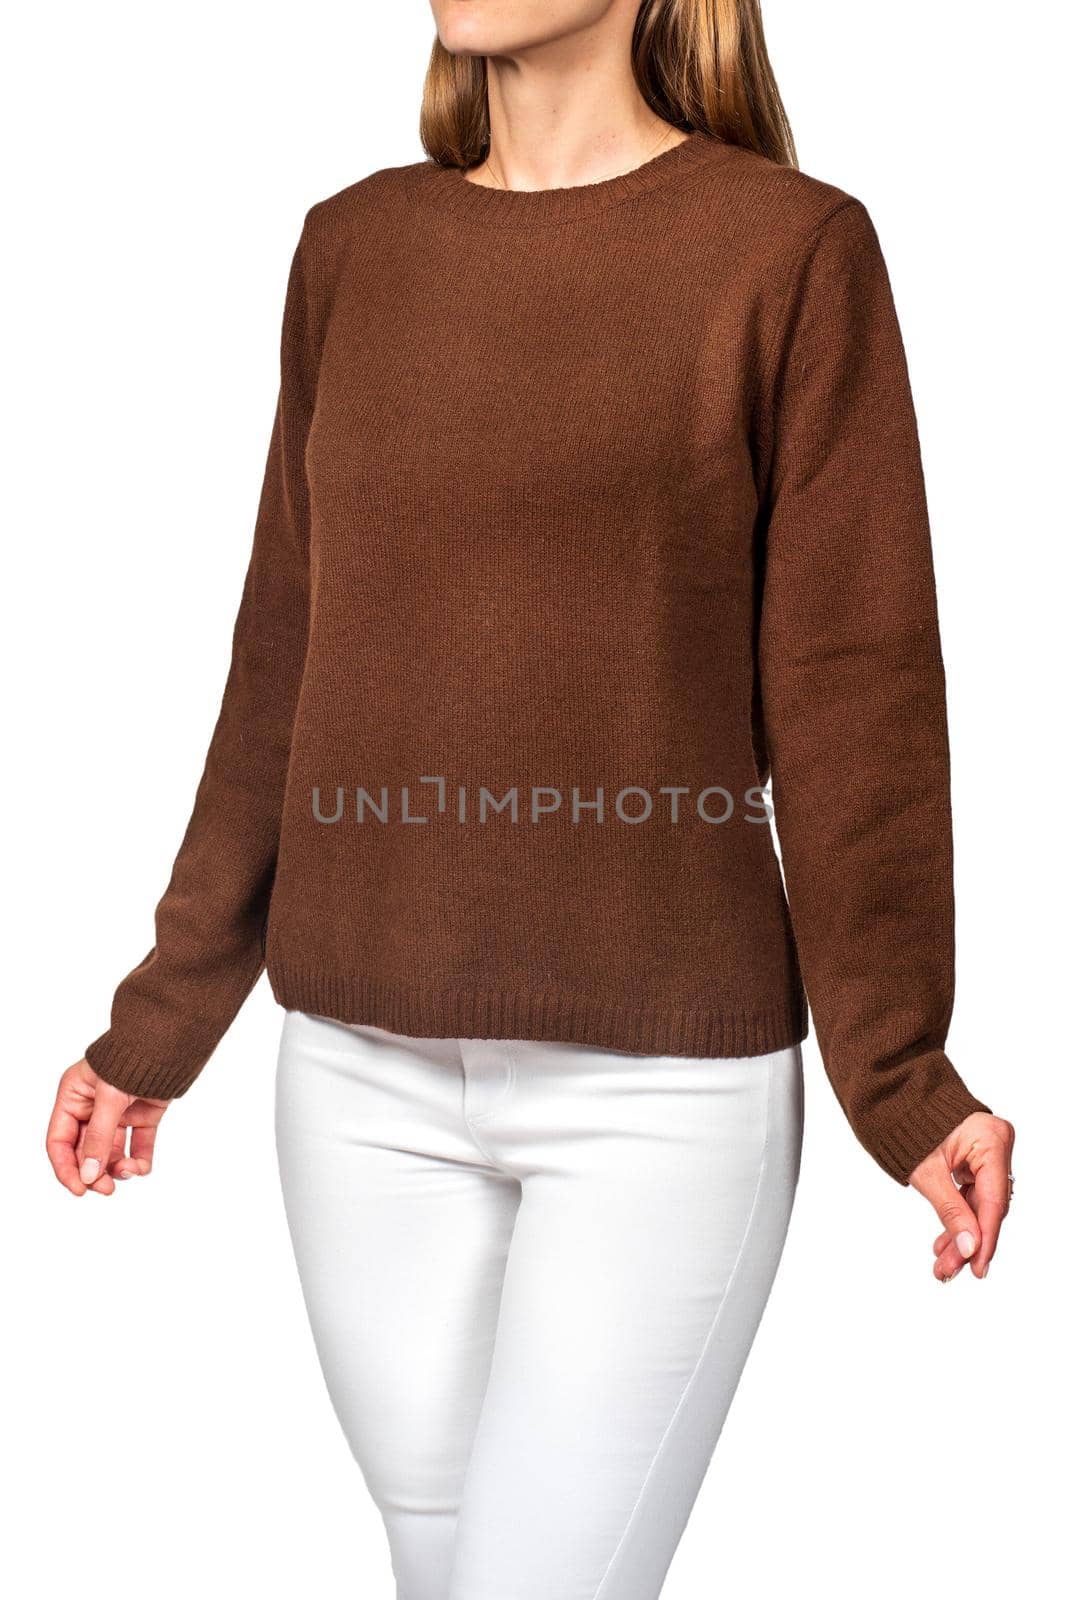 Young girl in a brown sweater over a white background